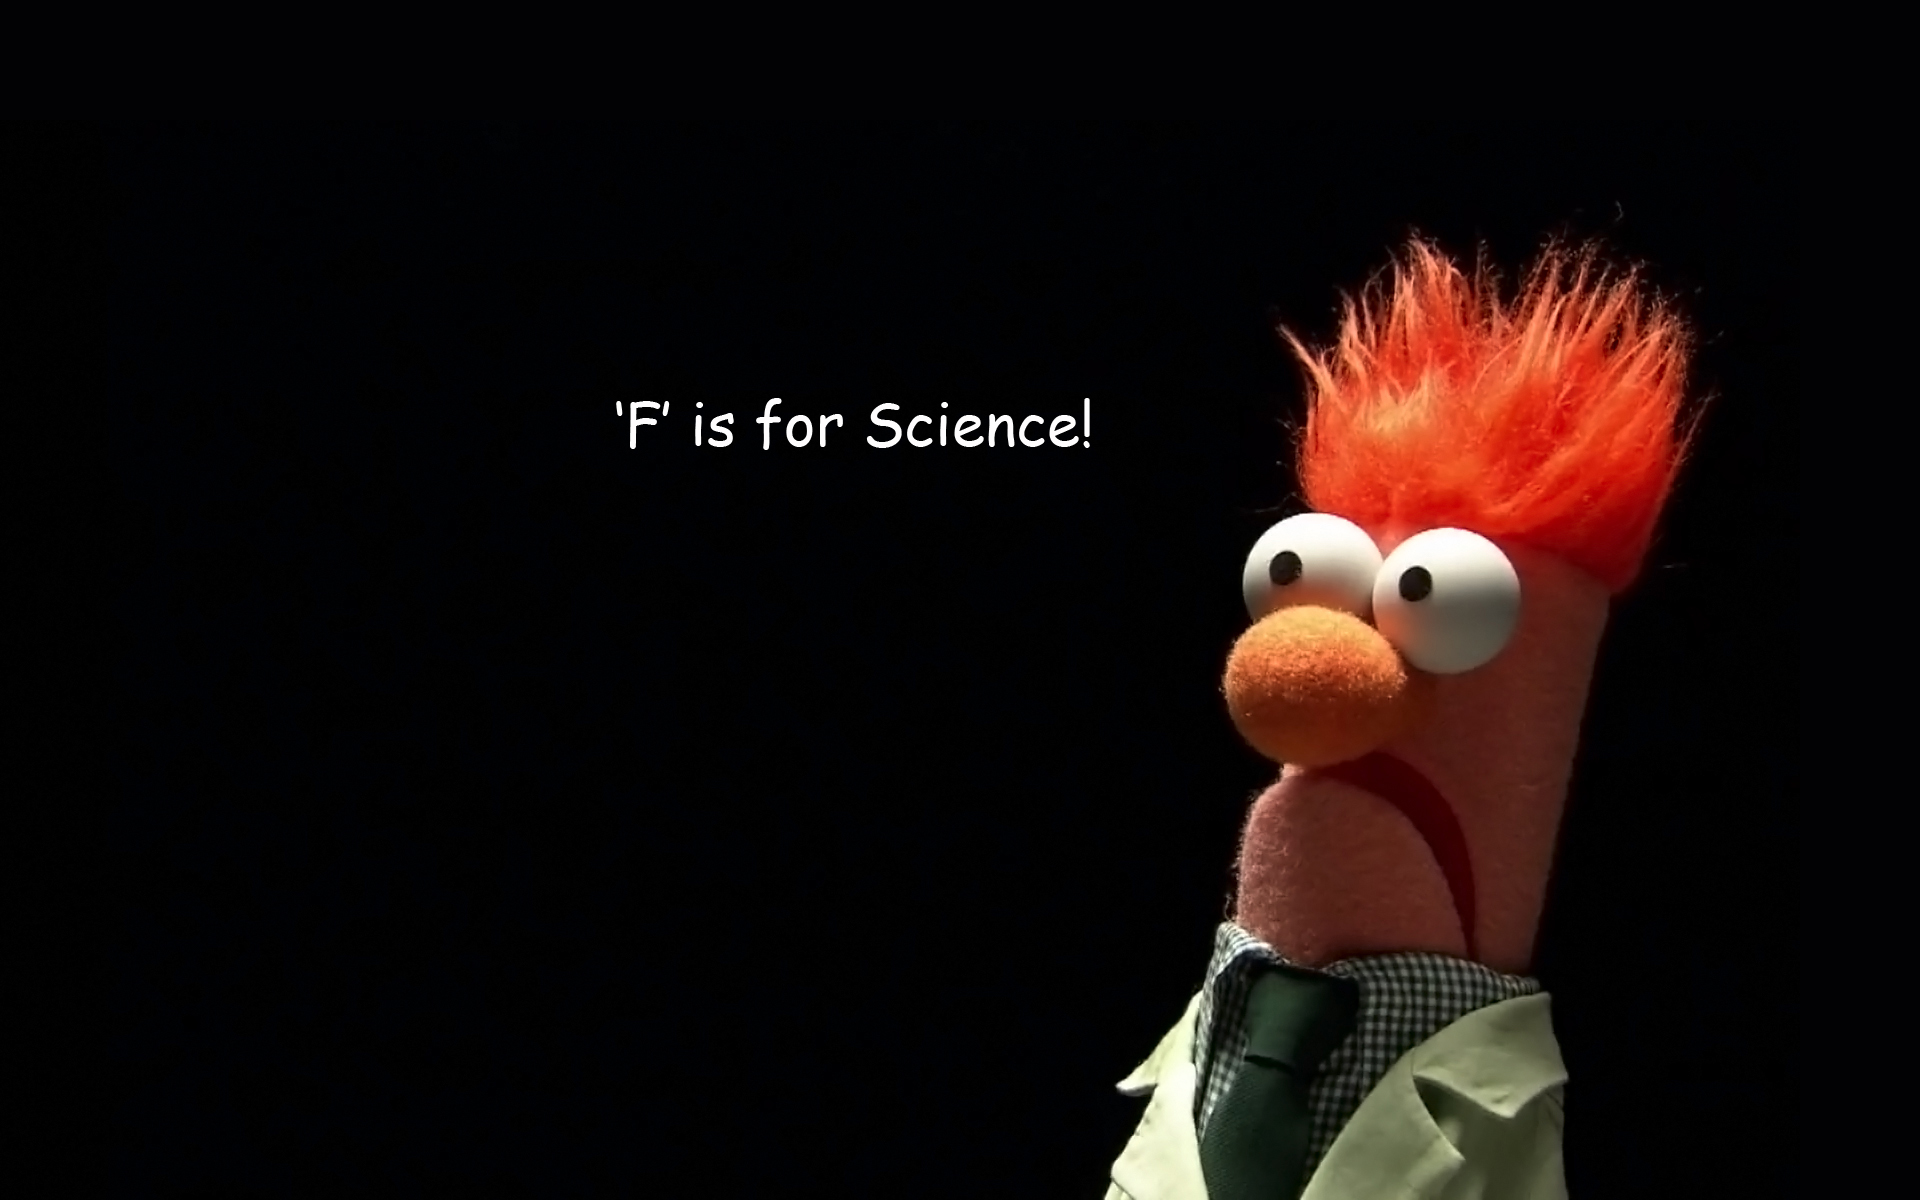  desktop background to help you through F is for Science